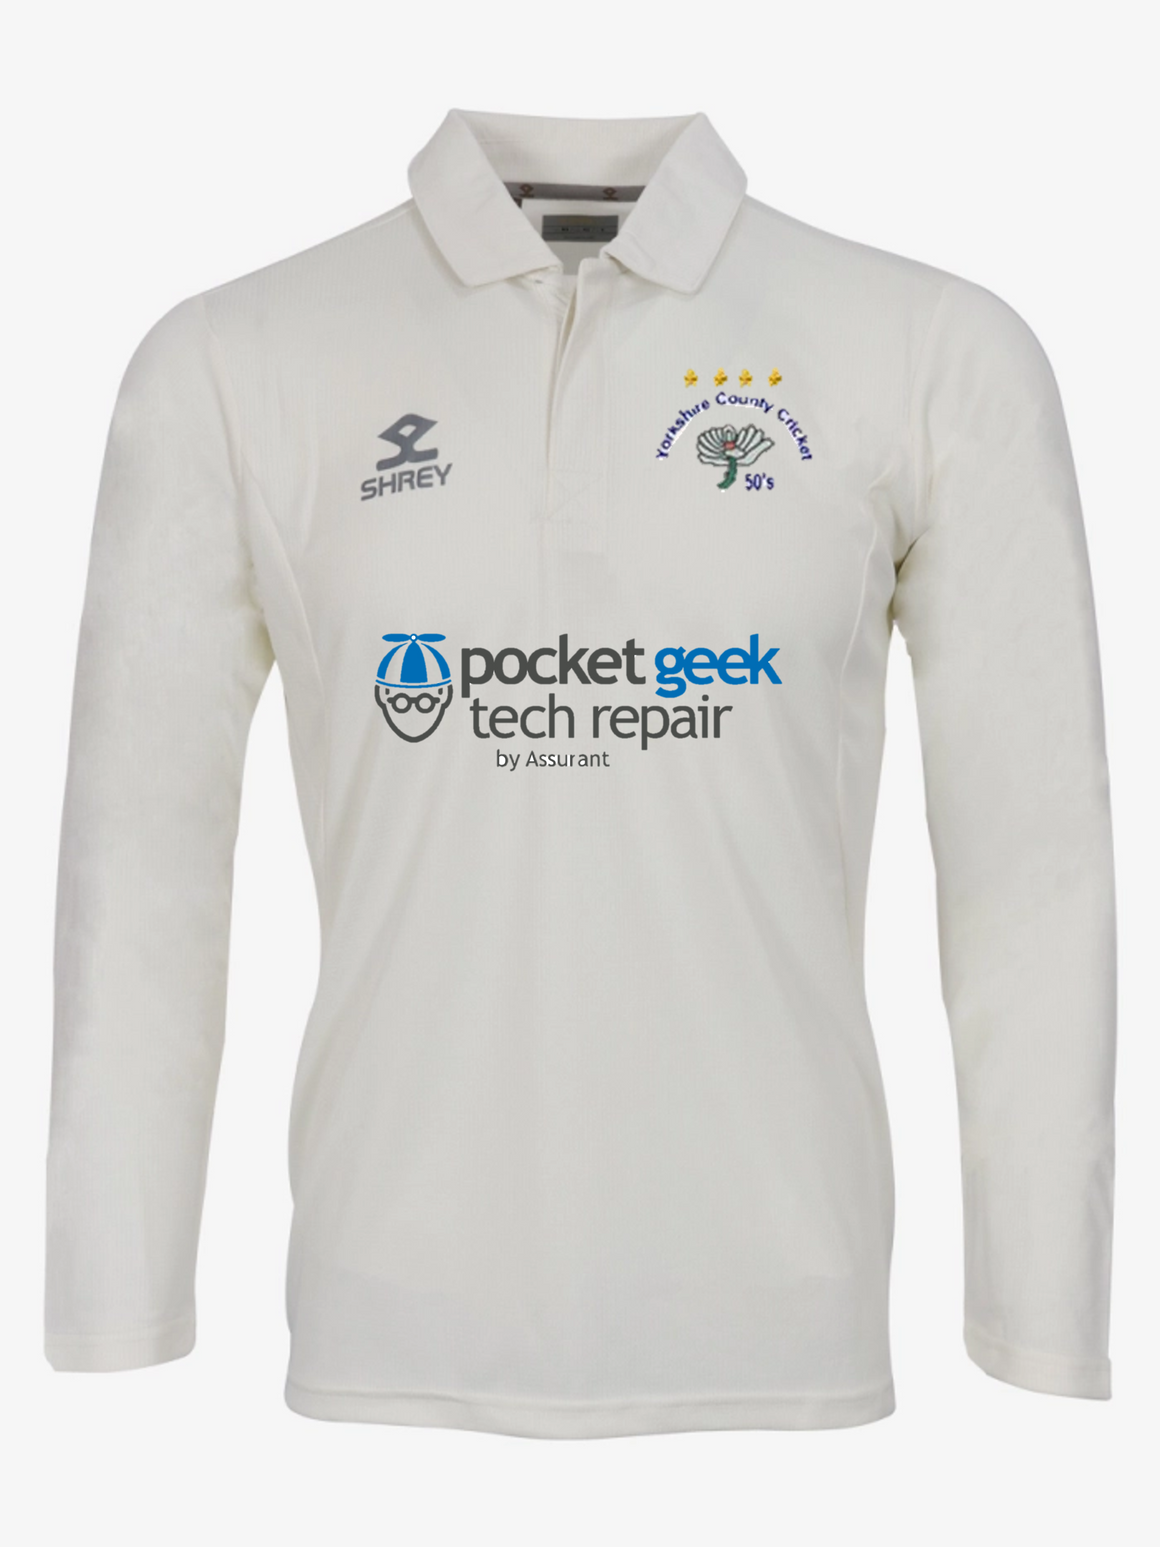 Yorkshire Over 50's L/S Performance Playing Shirt